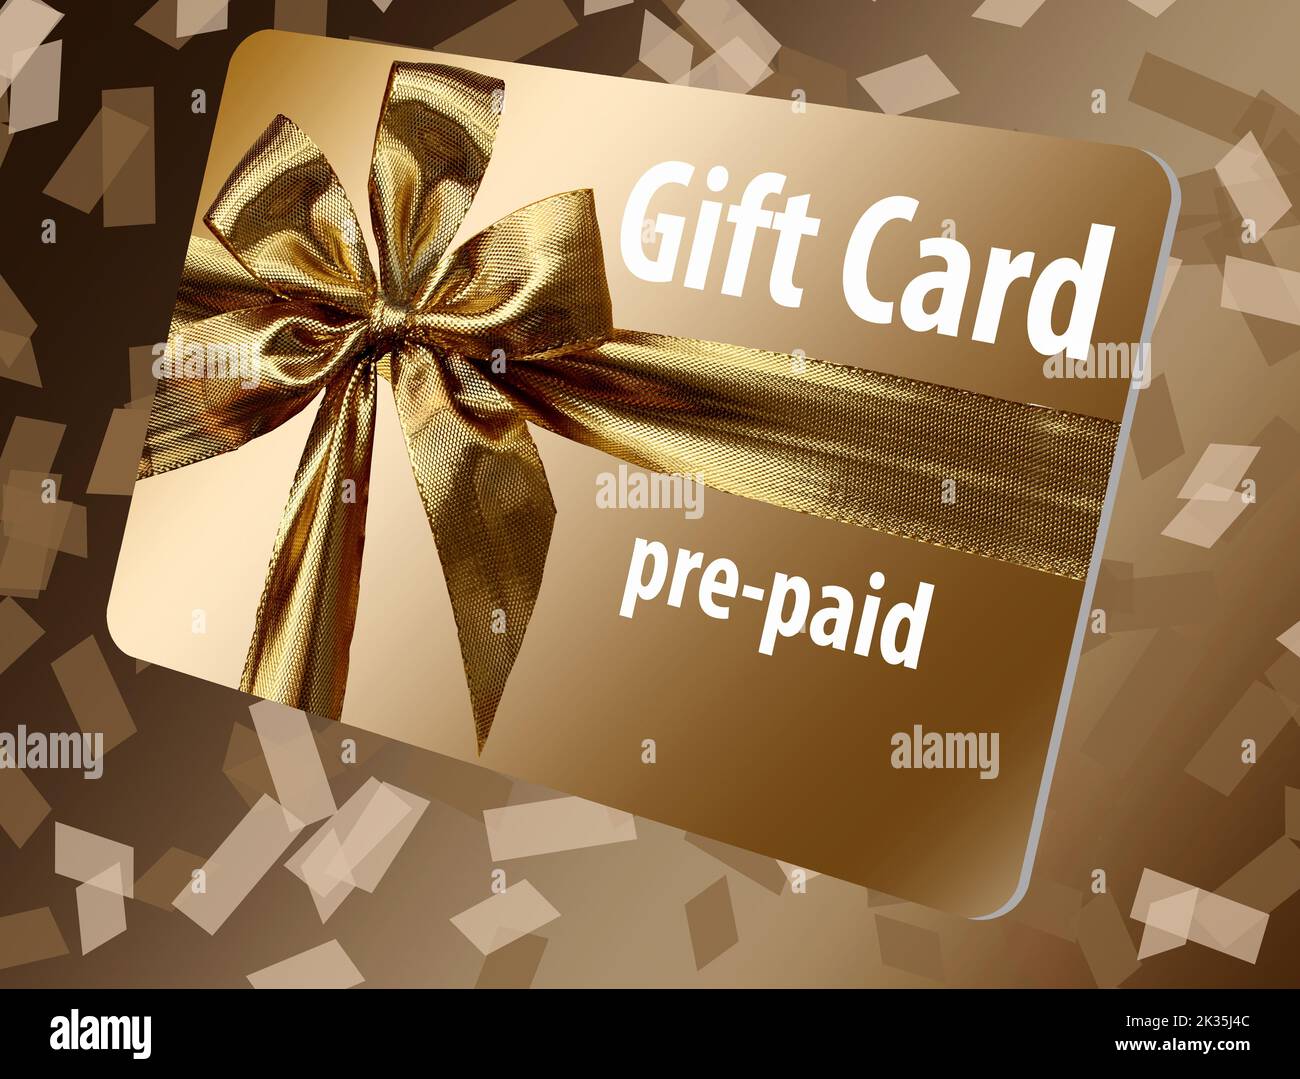 A pre-paid gift card is seen here. It is gold with a gold ribbon design on the front. Confetti is seen falling in the background of the 3-d illustrati Stock Photo